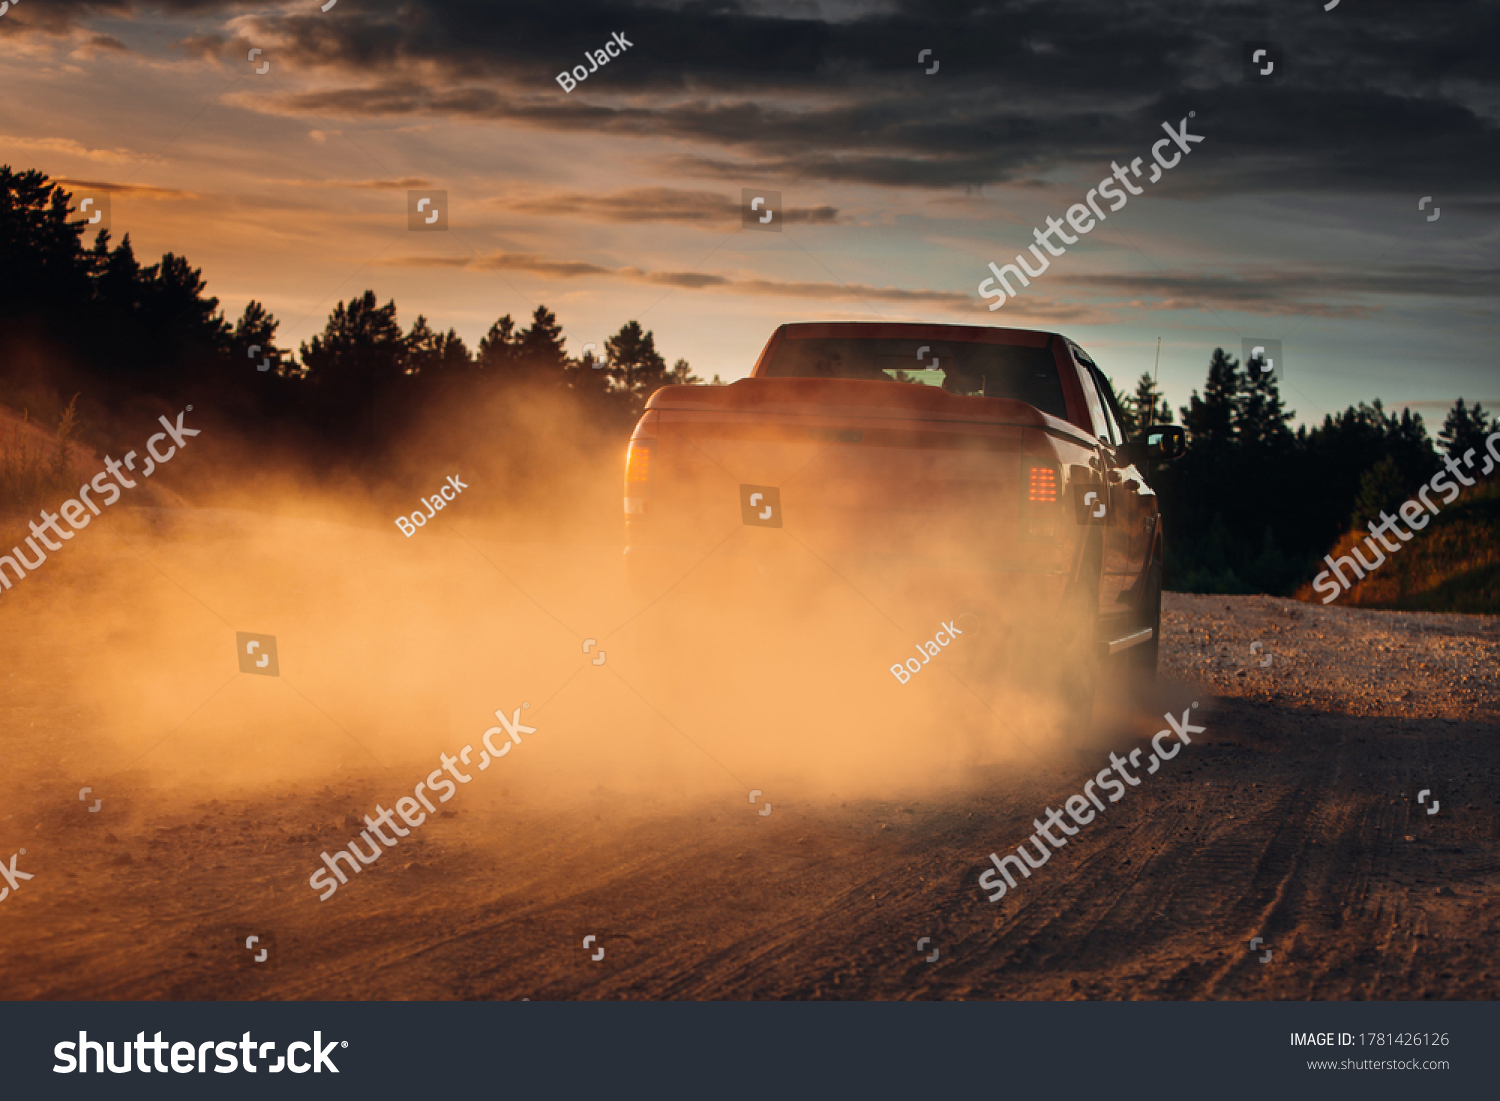 Pickup truck car in motion at country road with clouds of dust #1781426126